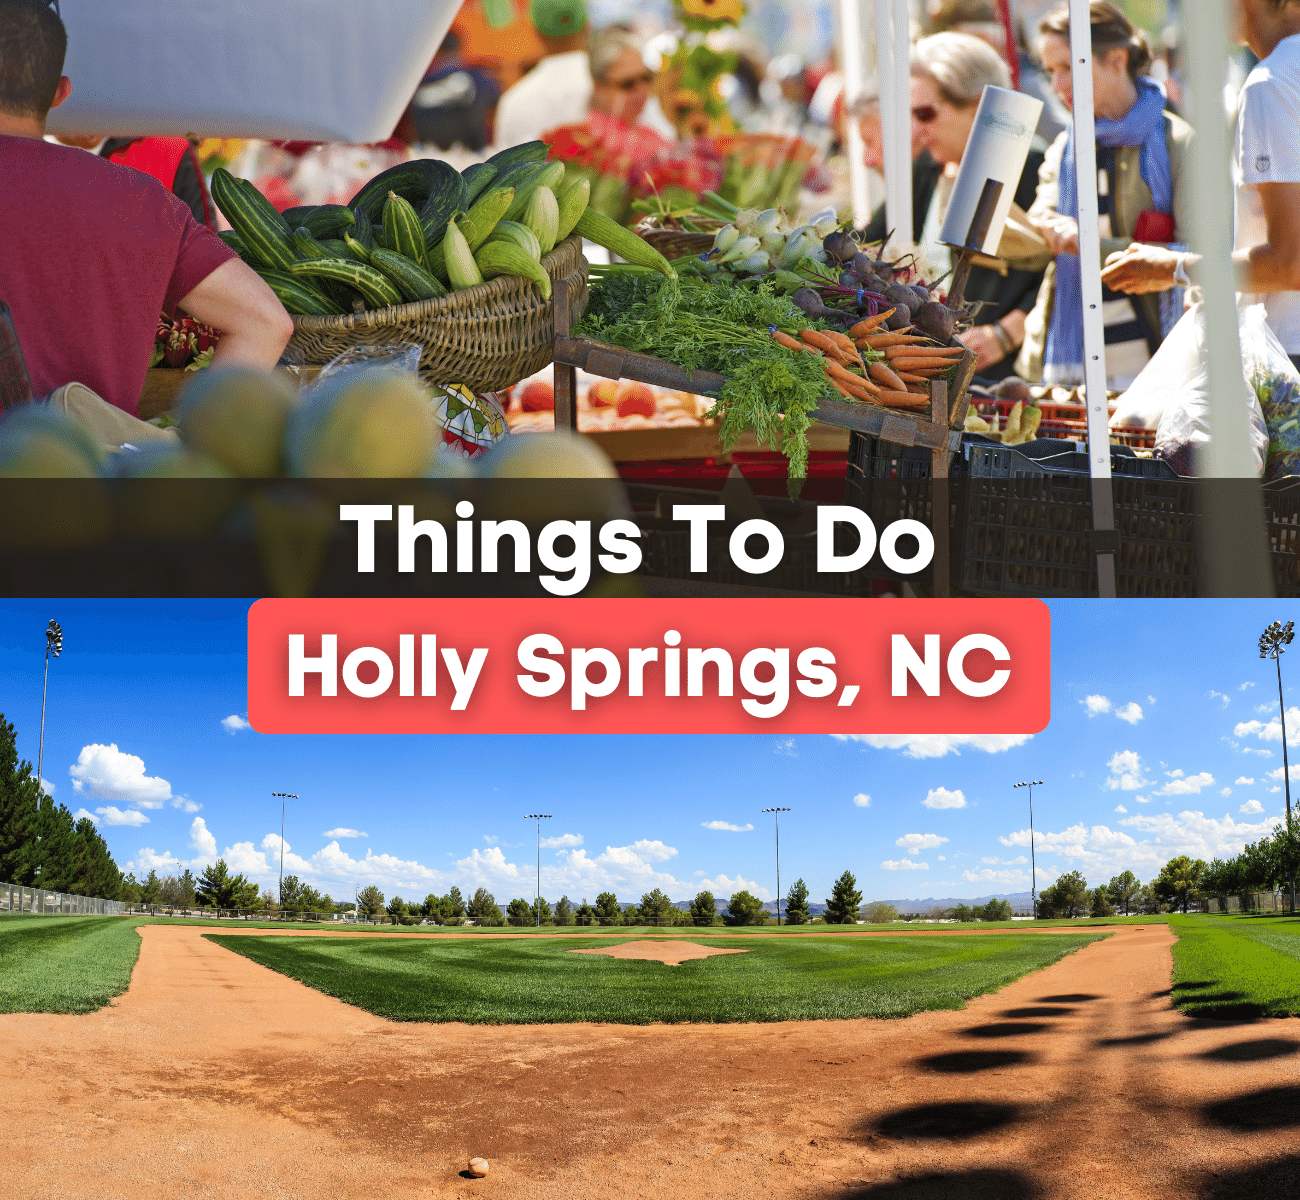 11 Things To Do in Holly Springs, NC